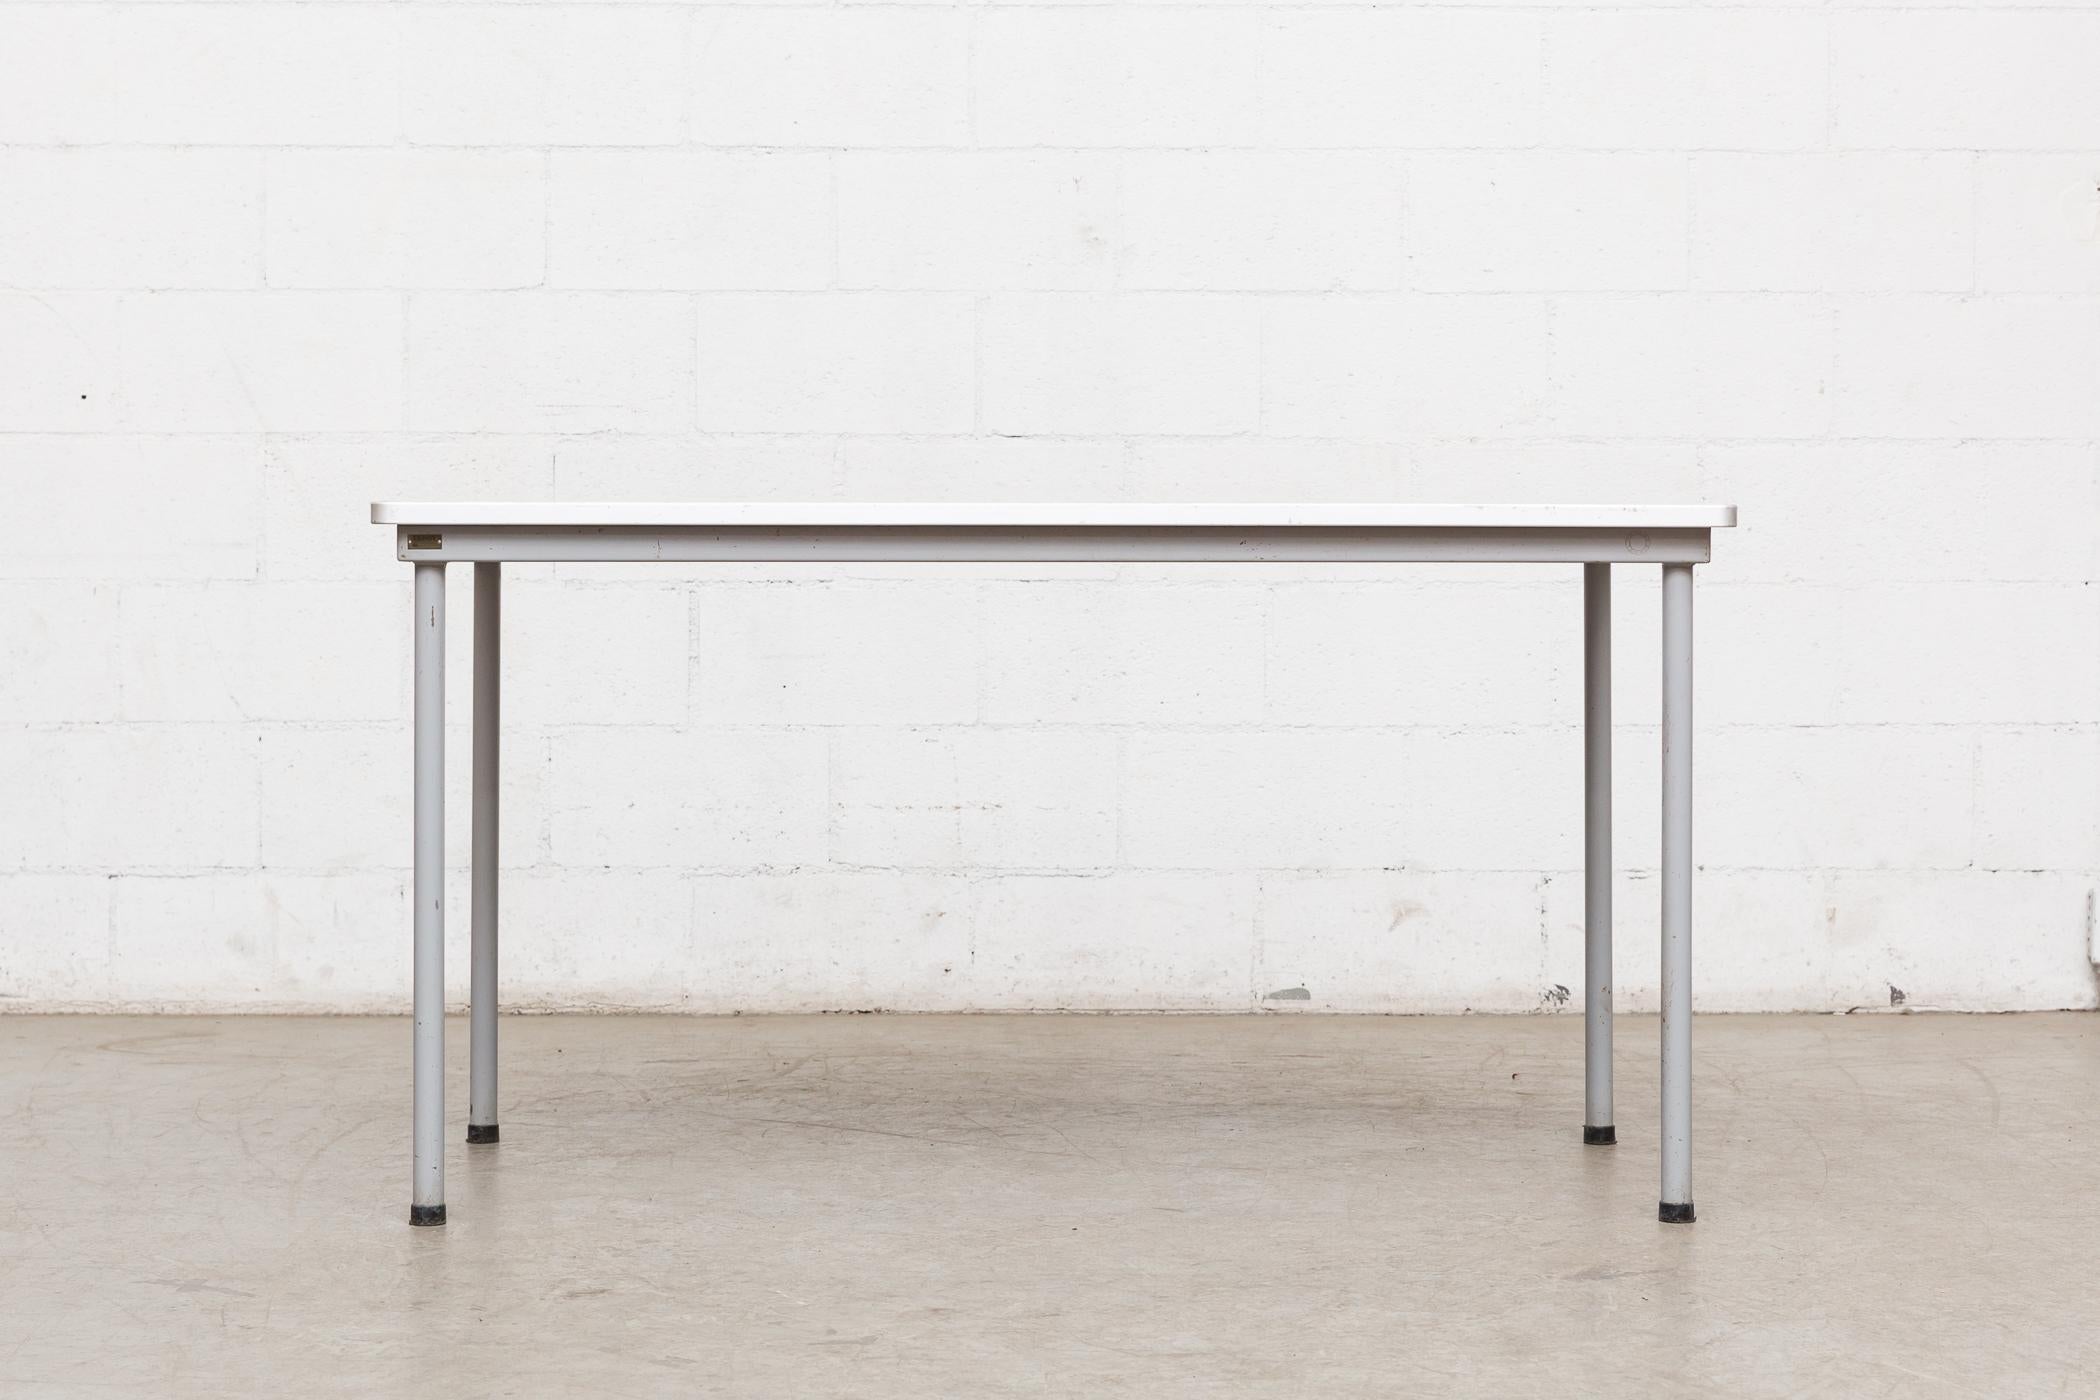 Industrial enameled grey frame with printed formica top. Great dining table, desk or work table from the University of Delft. Original manufacturer metal tag with item number, as pictured.